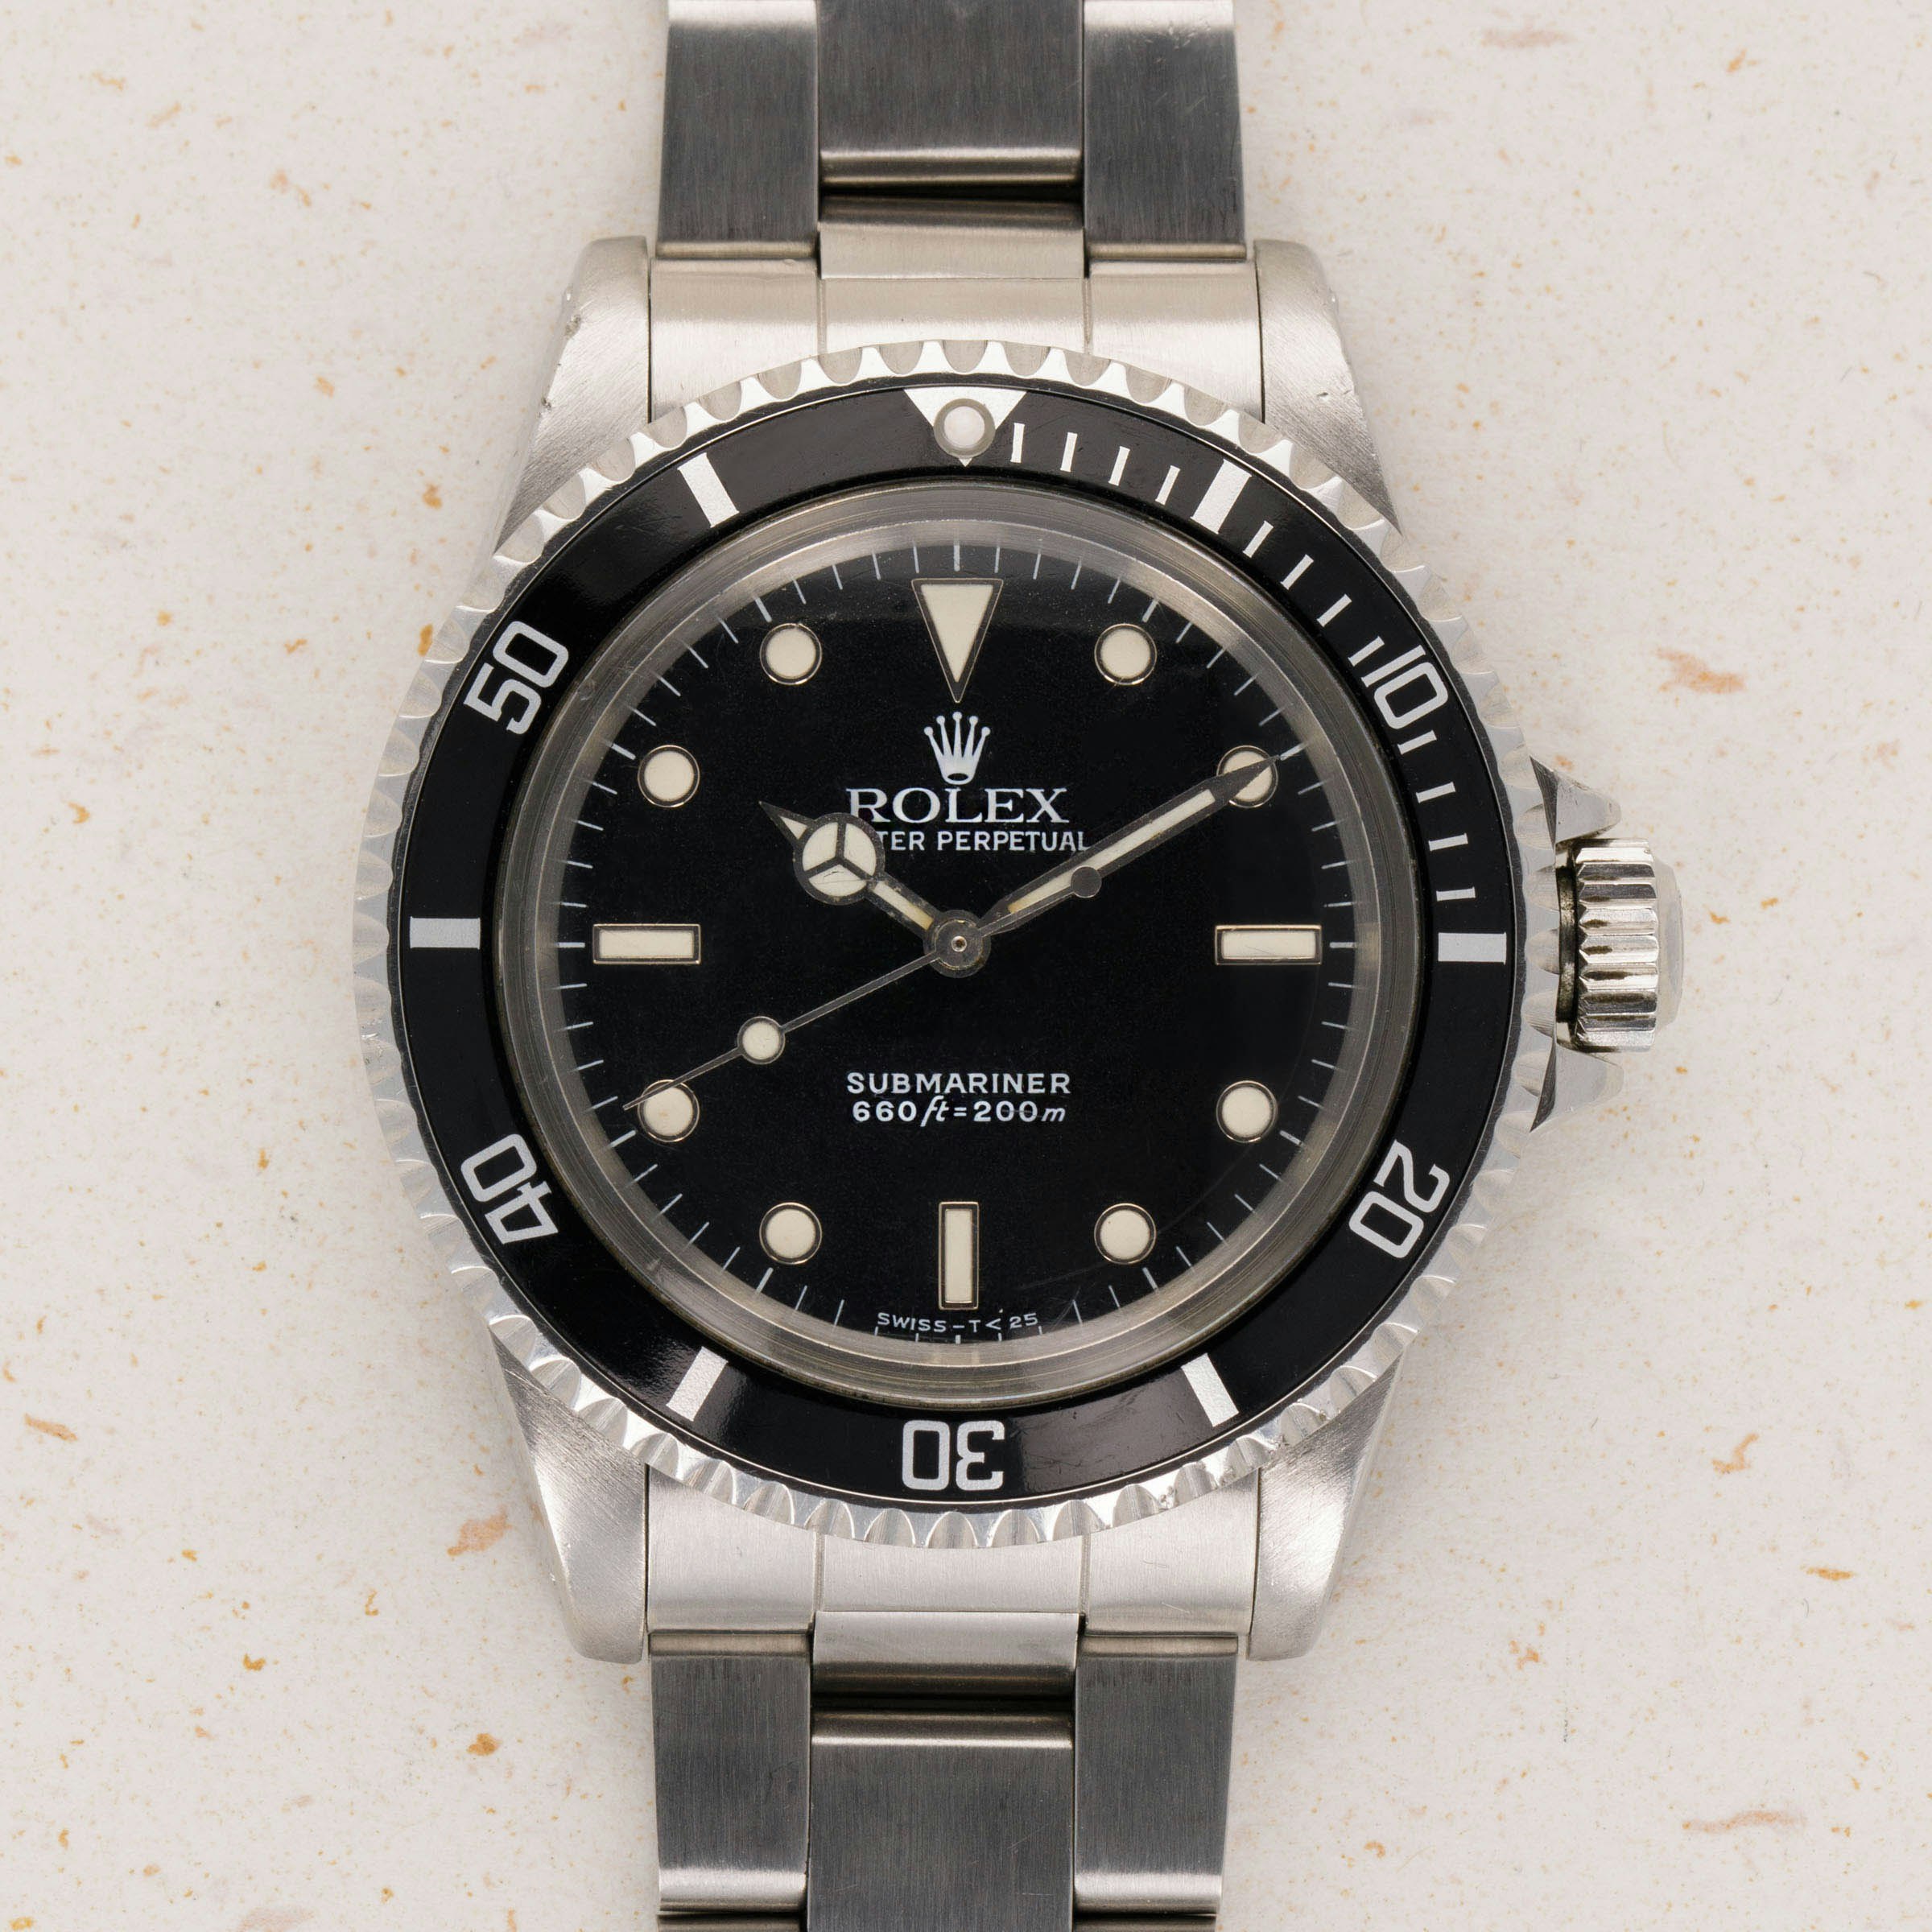 Thumbnail for Rolex Submariner 5513 Late Glossy Dial R-Serial